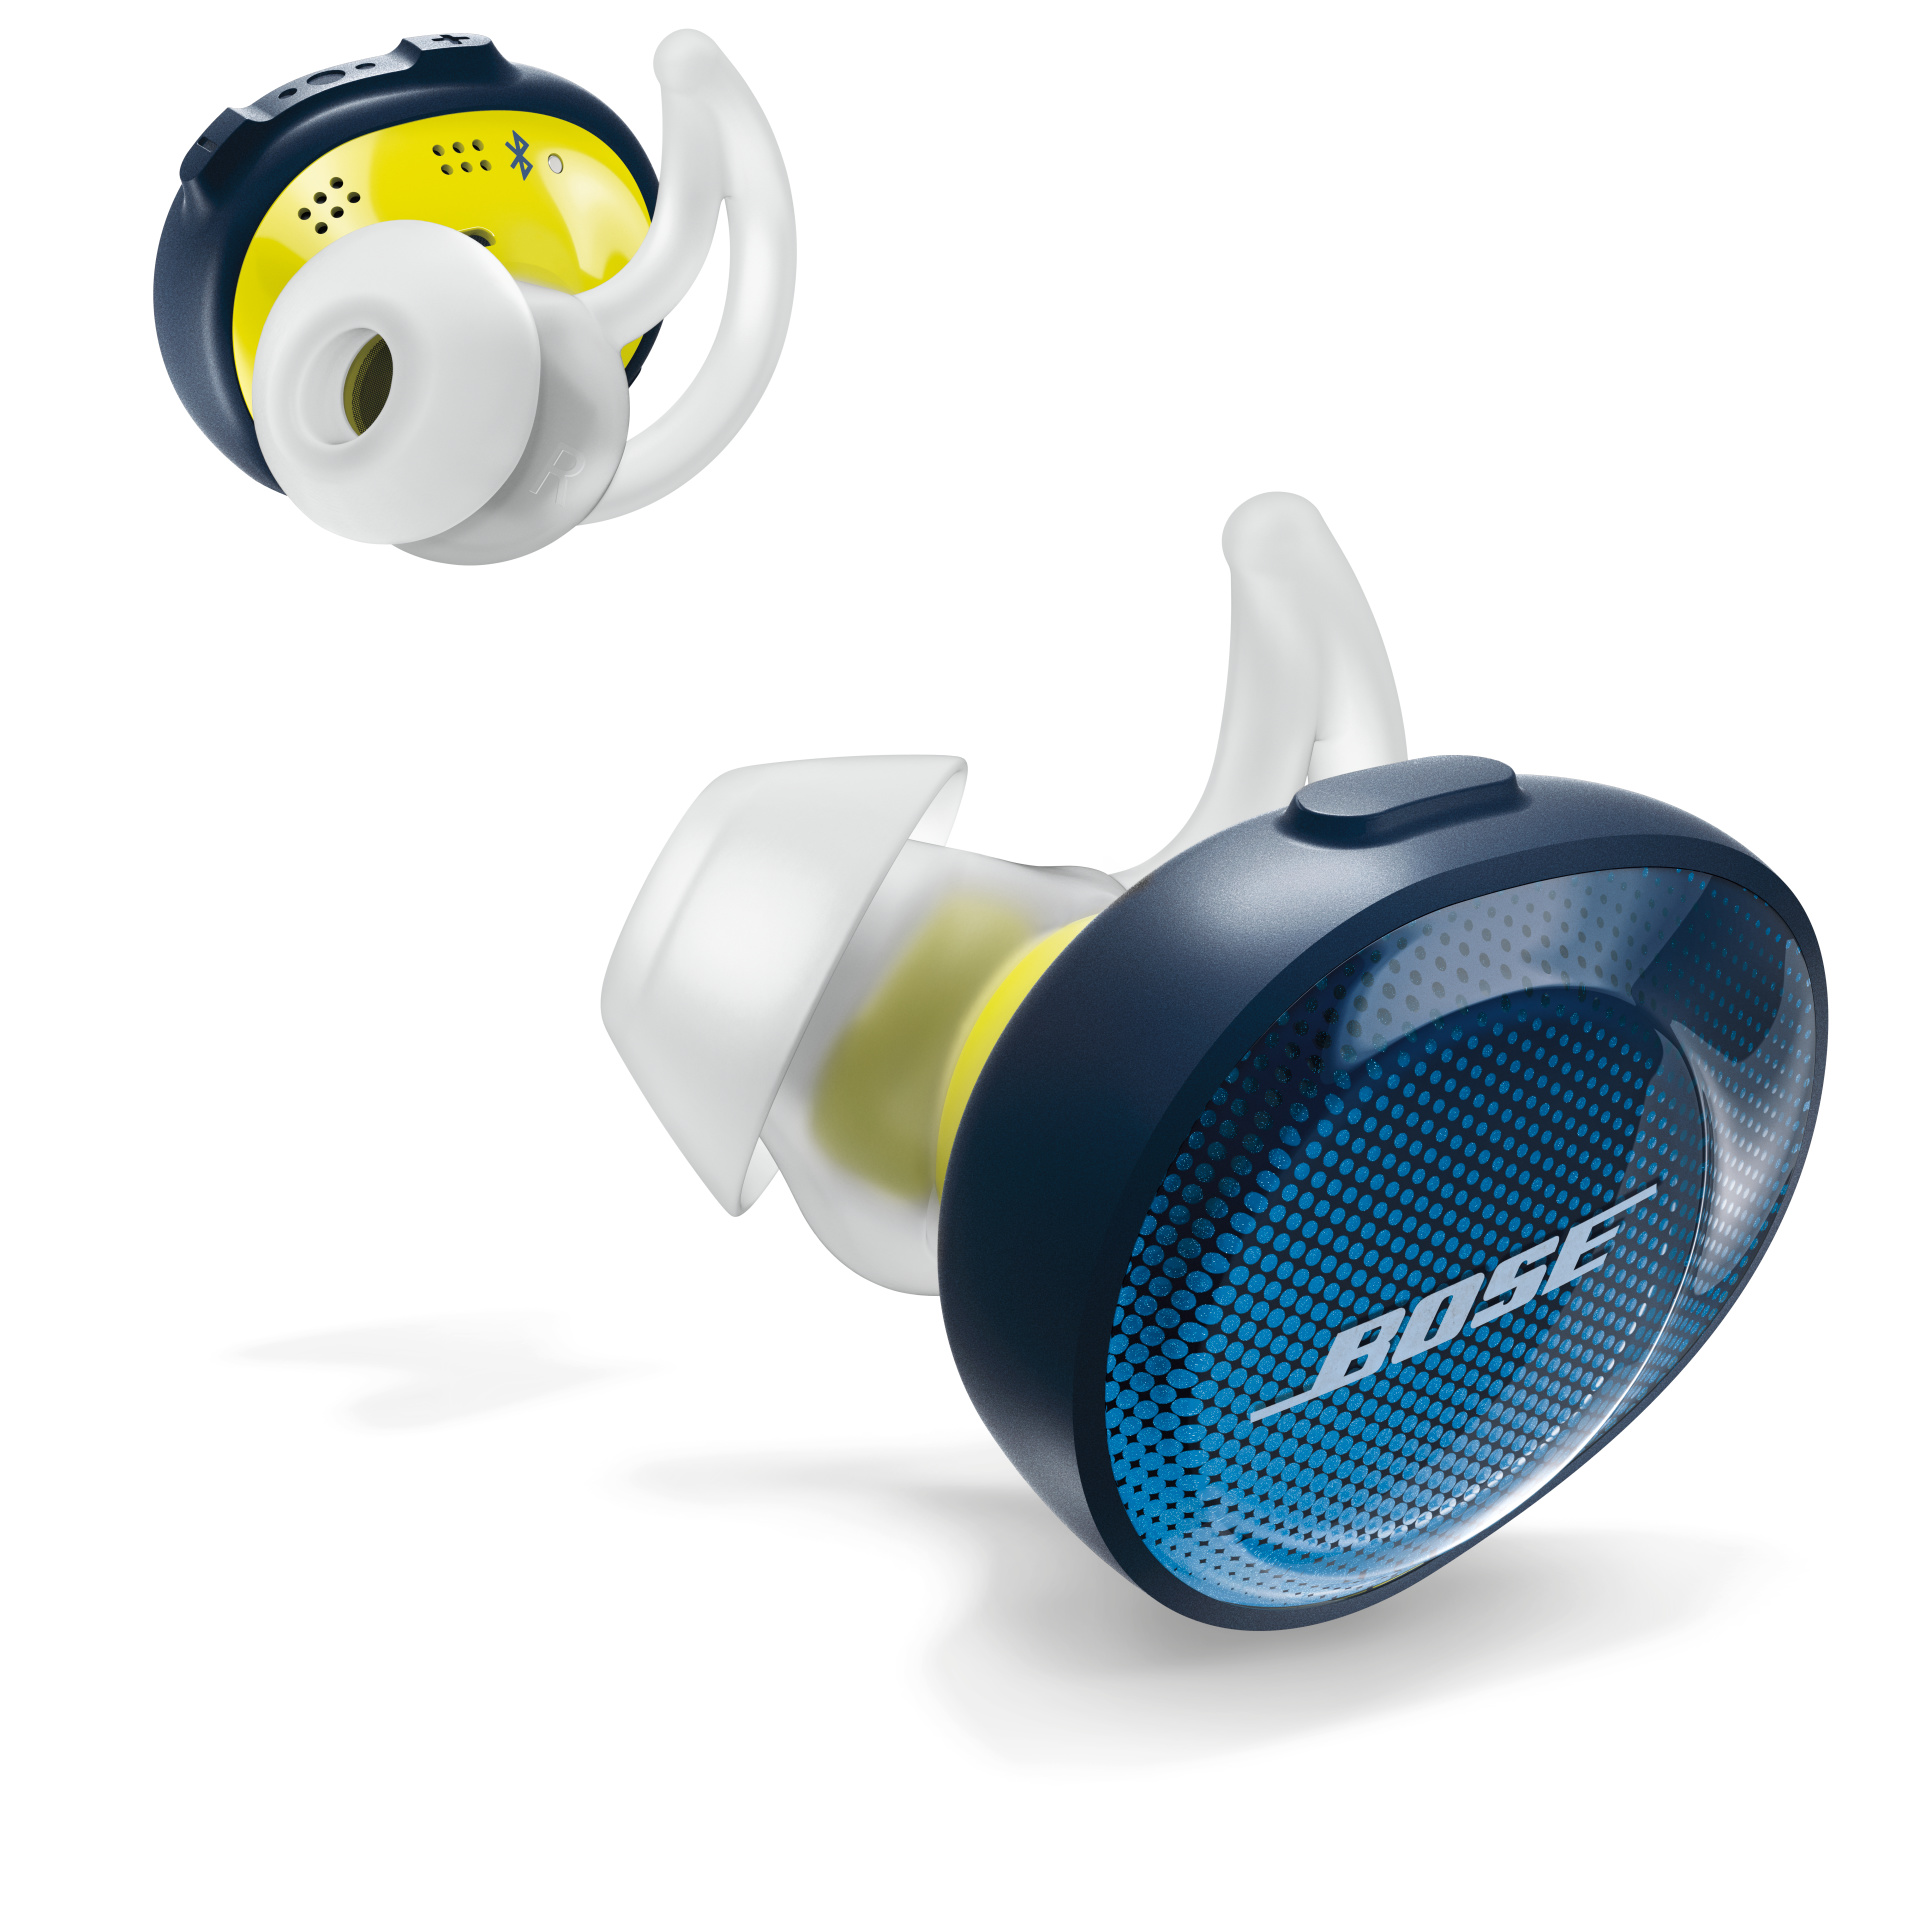 Bose SoundSport Bluetooth True Wireless Earbuds with Charging Case, Blue, SNDSPFREENVY - image 1 of 6